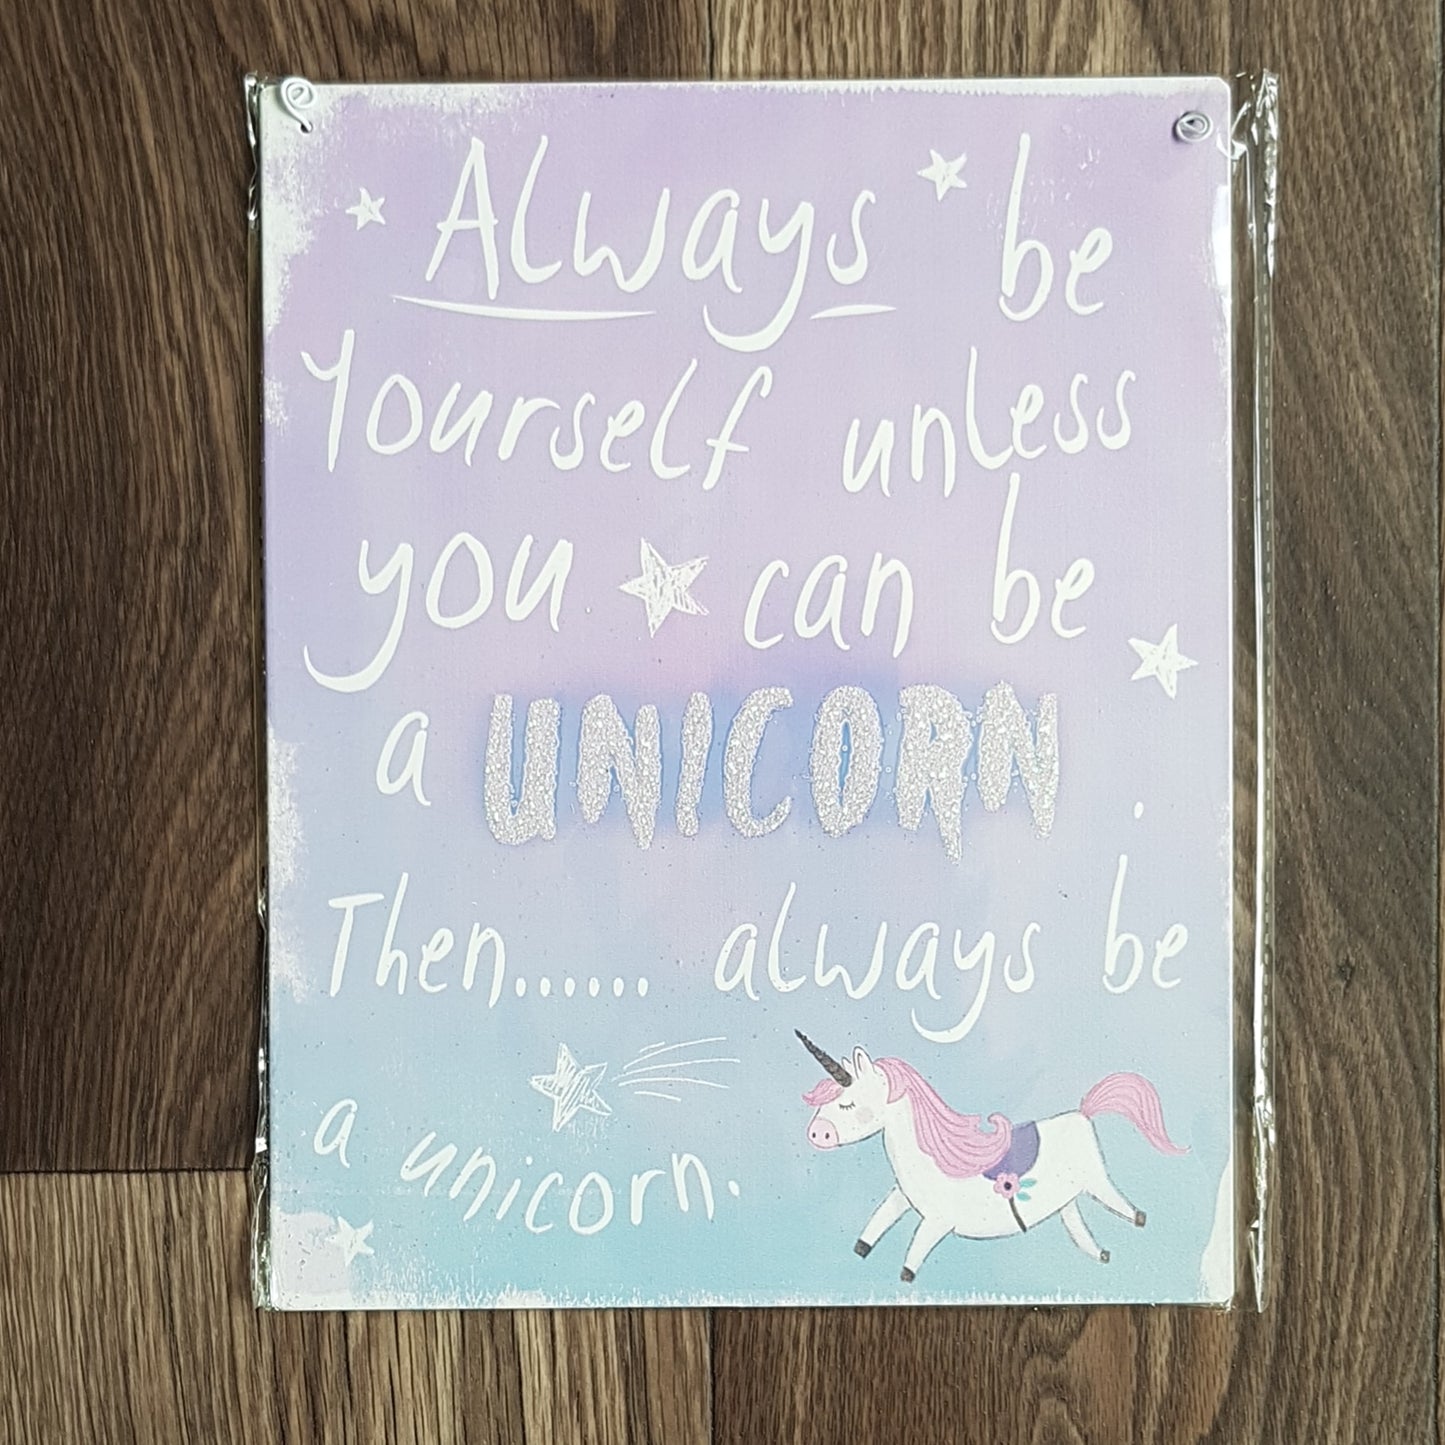 Always be yourself unless you can be a unicorn - hanging metal sign - The Future Image